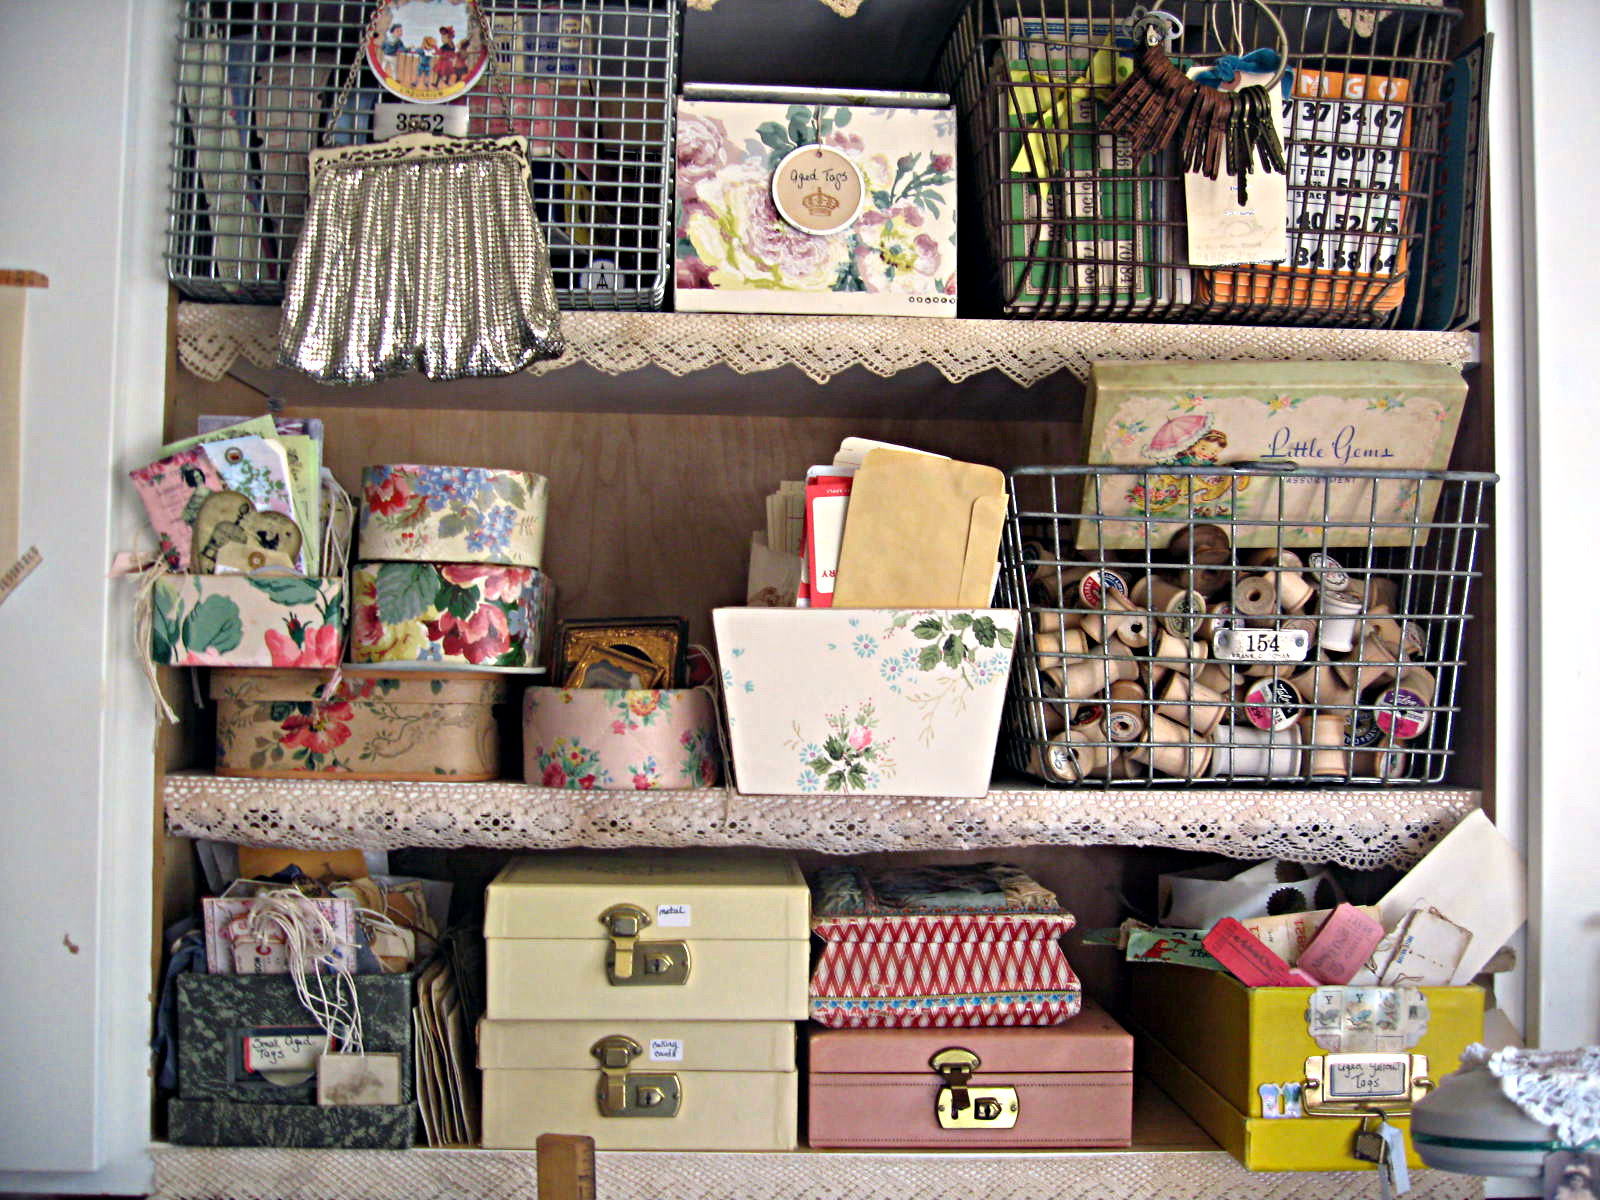 Storage And More I Love To Use Old Locker Baskets